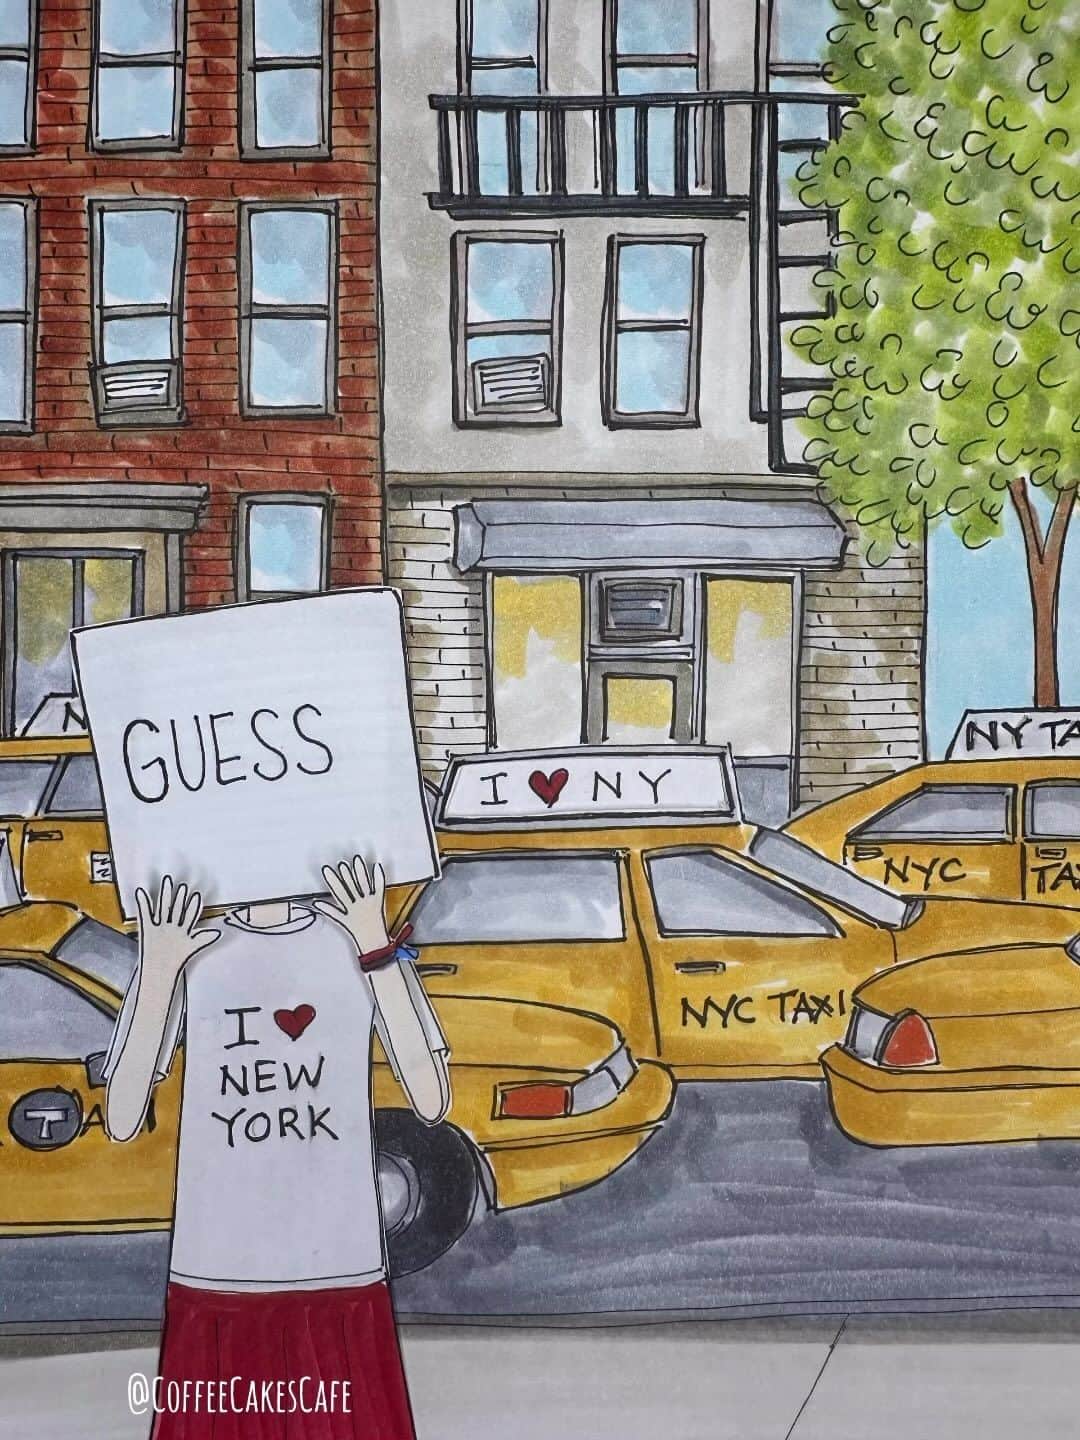 RIASIMのインスタグラム：「Can you guess the answer??? . . .. . . .  . Based on the info from @streeteasy the answer is around 19k cabs! 13,500 are yellow cabs and 5,600 are green cabs located in upper Manhattan and the outer boroughs.🚕🚕 . Hope you enjoyed, once again, fun facts about NY! Have a wonderful day everyone! Supposed to be a hot one today !!!😓 . . . . . . . . . . #westvillage #westvillagenyc #westvillagelife #westvillagenewyork #westvillagelove #prettycitynewyork #newyorkcity #stopmotionanimation #coffeecakescafe #streetsofnewyork #nyccab #made_in_ny」